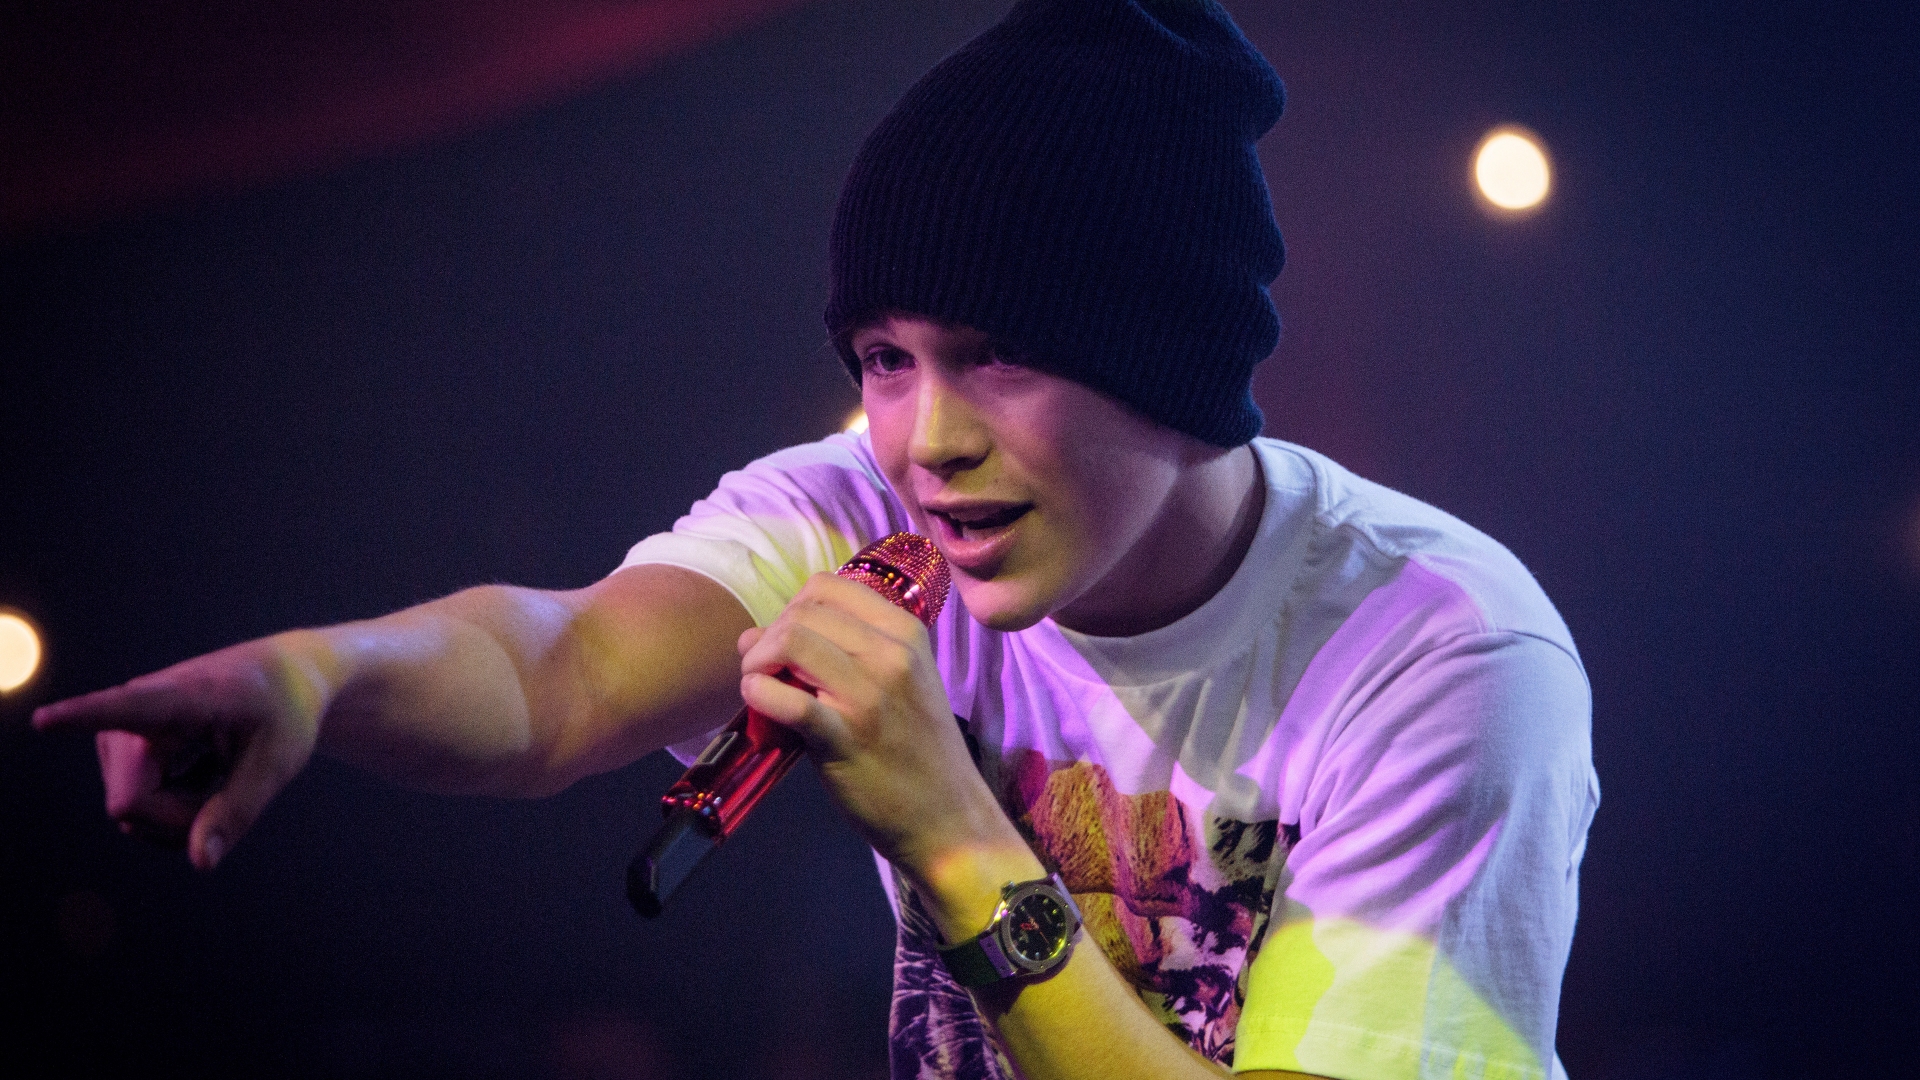 Austin Mahone on Stage for 1920 x 1080 HDTV 1080p resolution